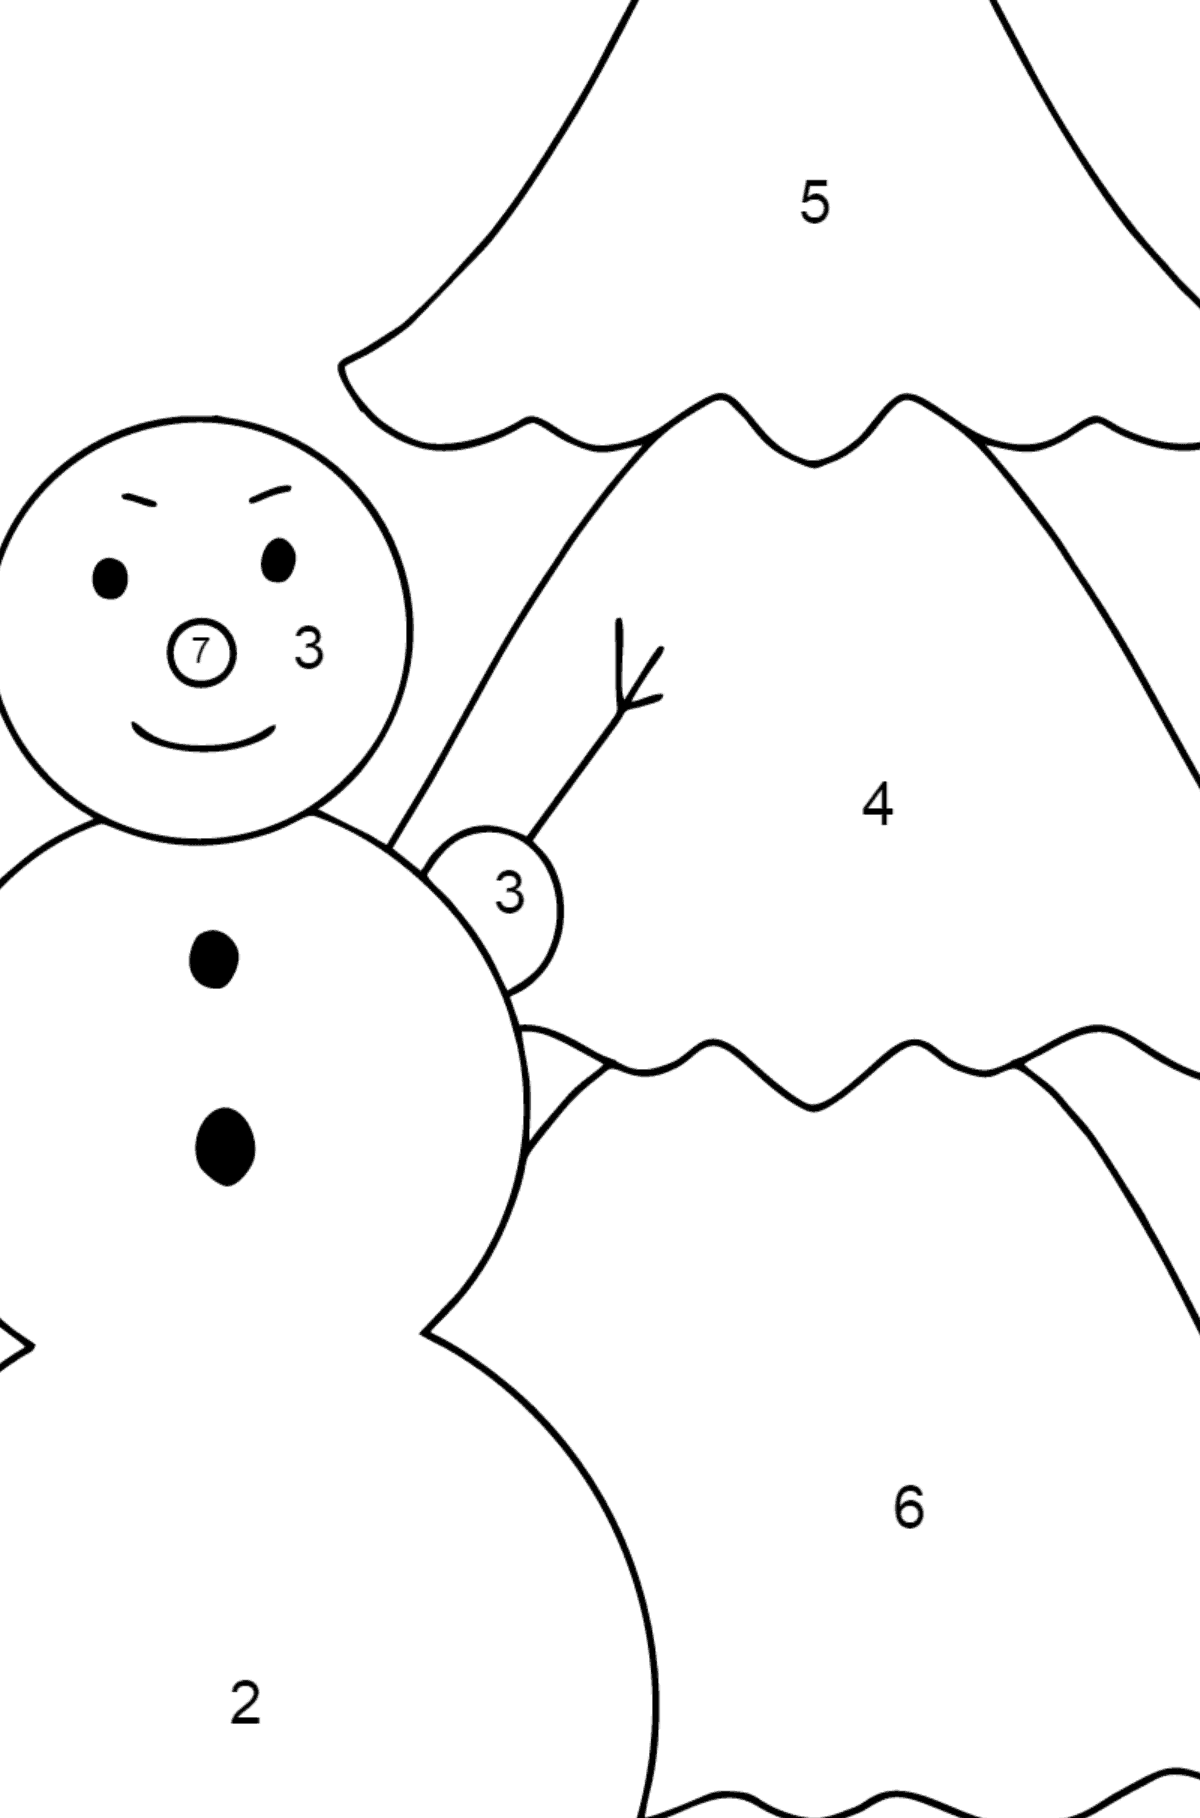 Snowman coloring page for kids - Coloring by Numbers for Kids